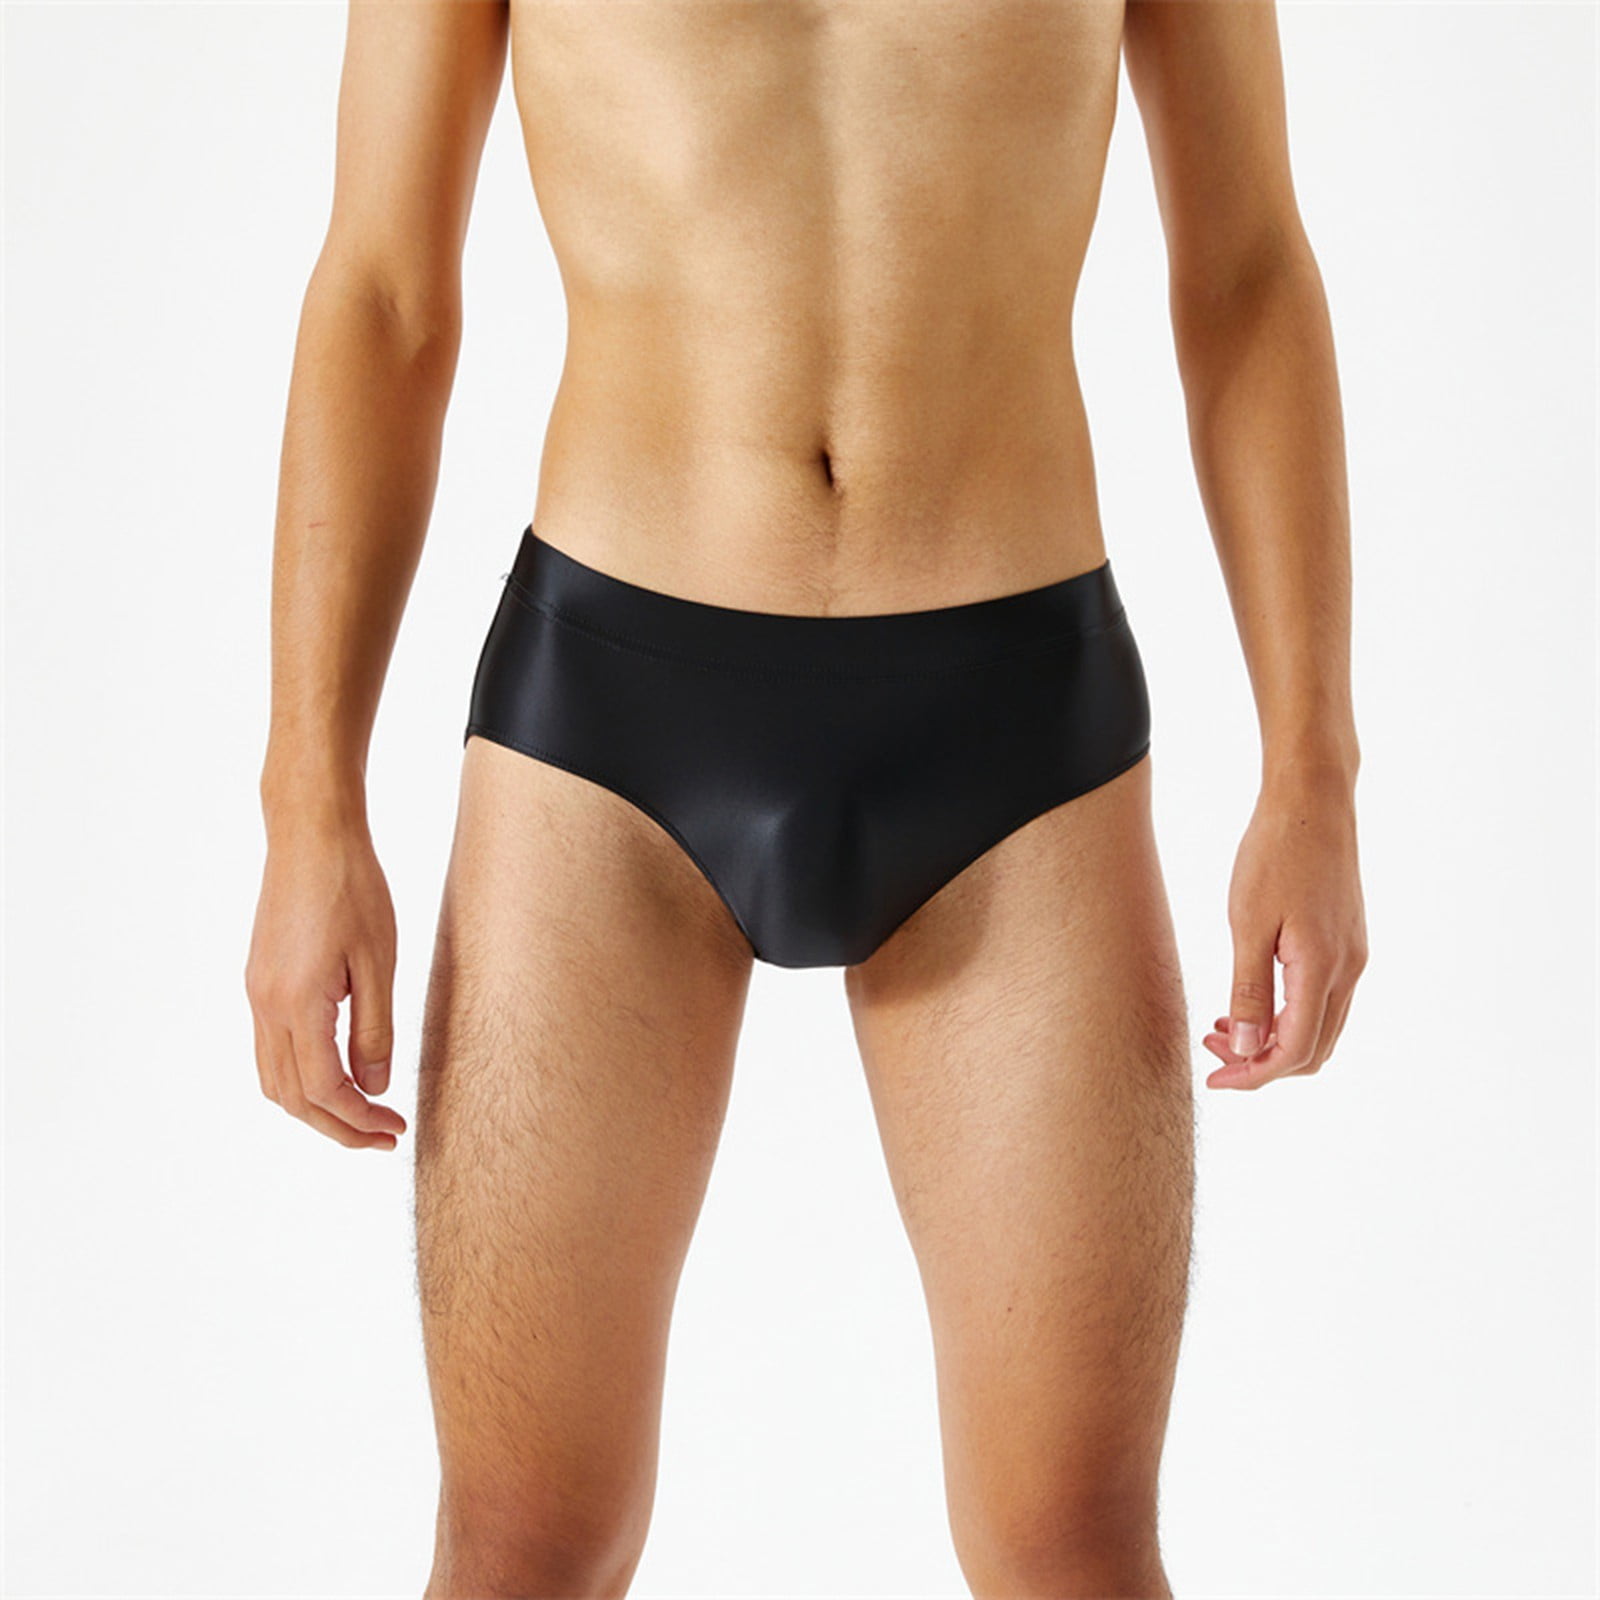 Men'S Underwear Briefs Crotch Seamless Glossy Silky High Elastic Plus Size  Transparent. Pant 